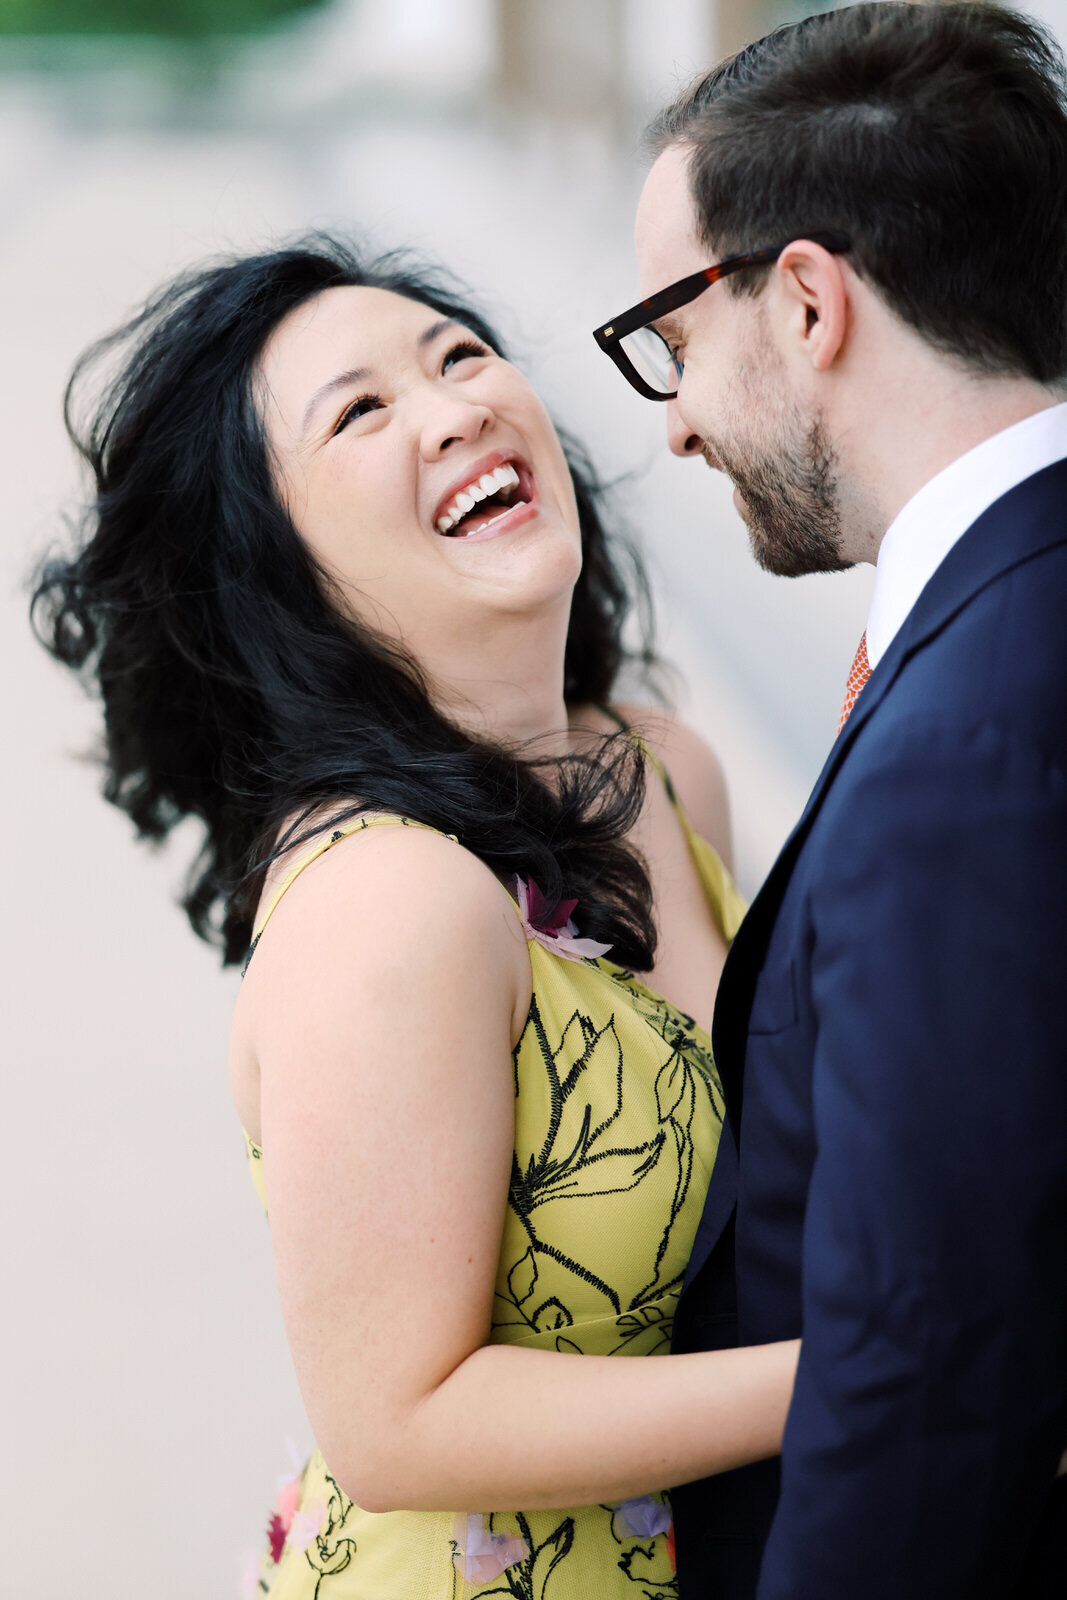 DC film wedding photographer photographs a stylish couple during their Kennedy Center engagement session.